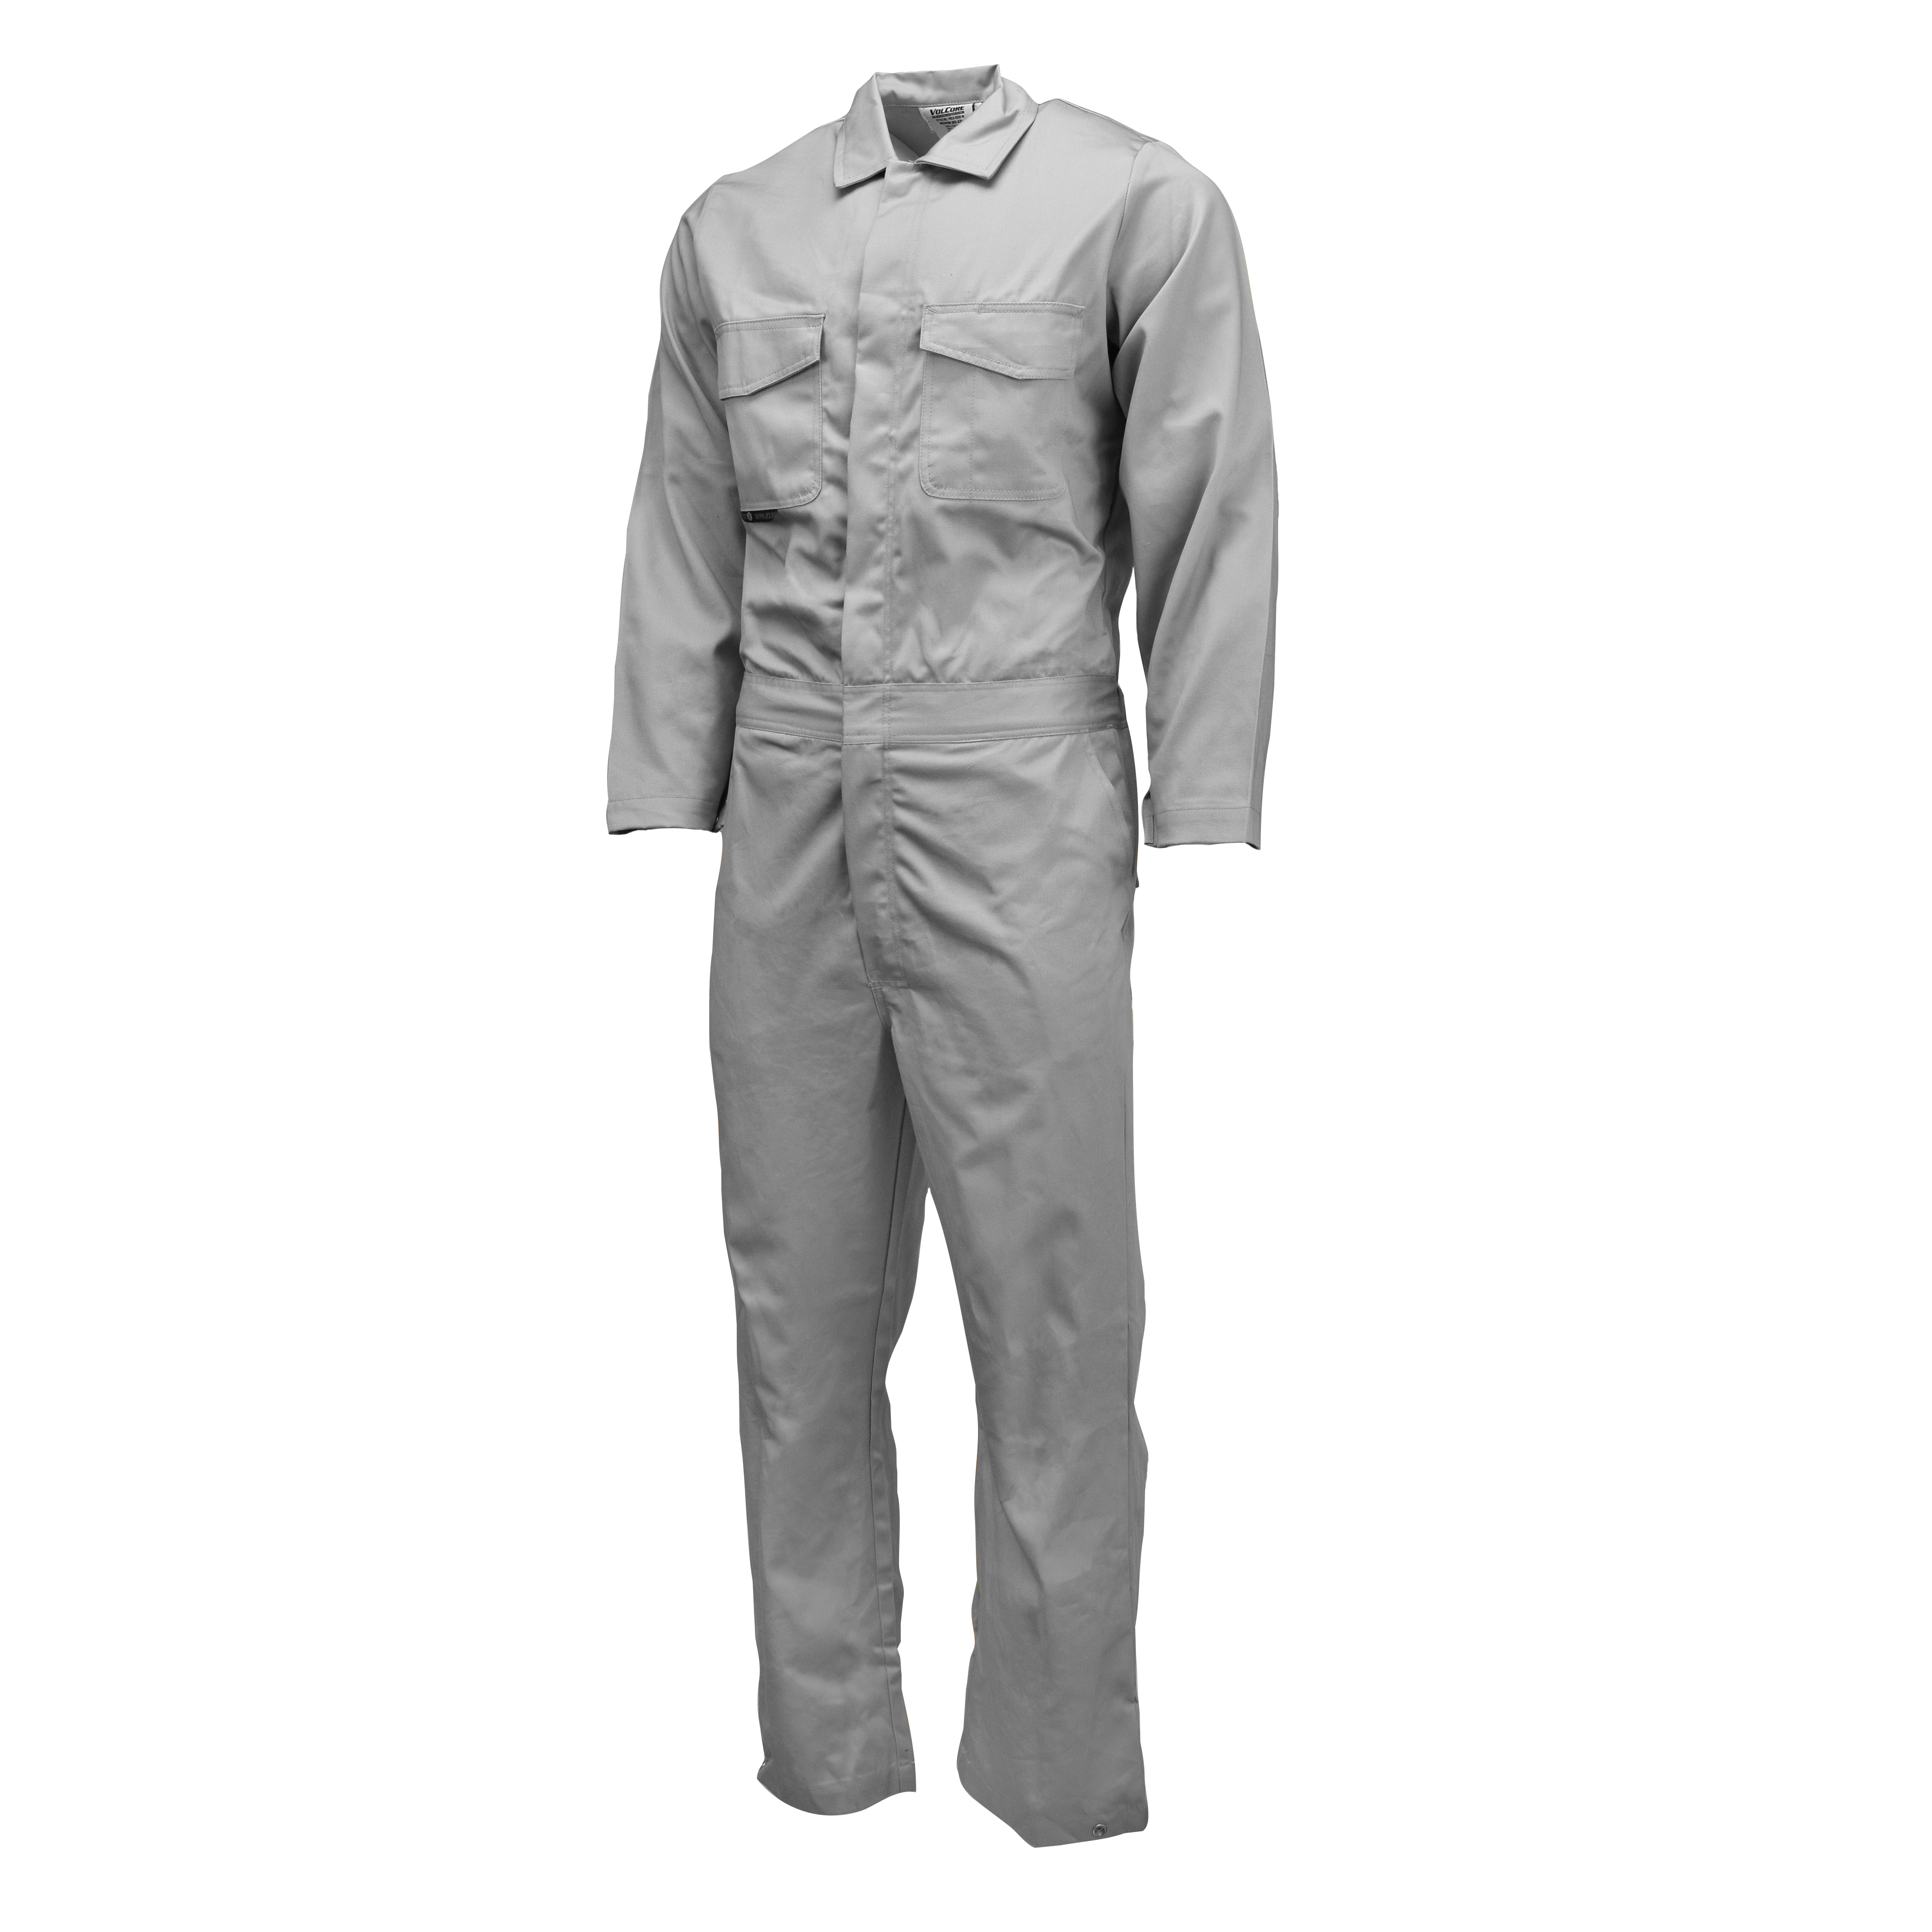 FRCA-003 VolCore™ Cotton FR Coverall - Gray - Size 5XT